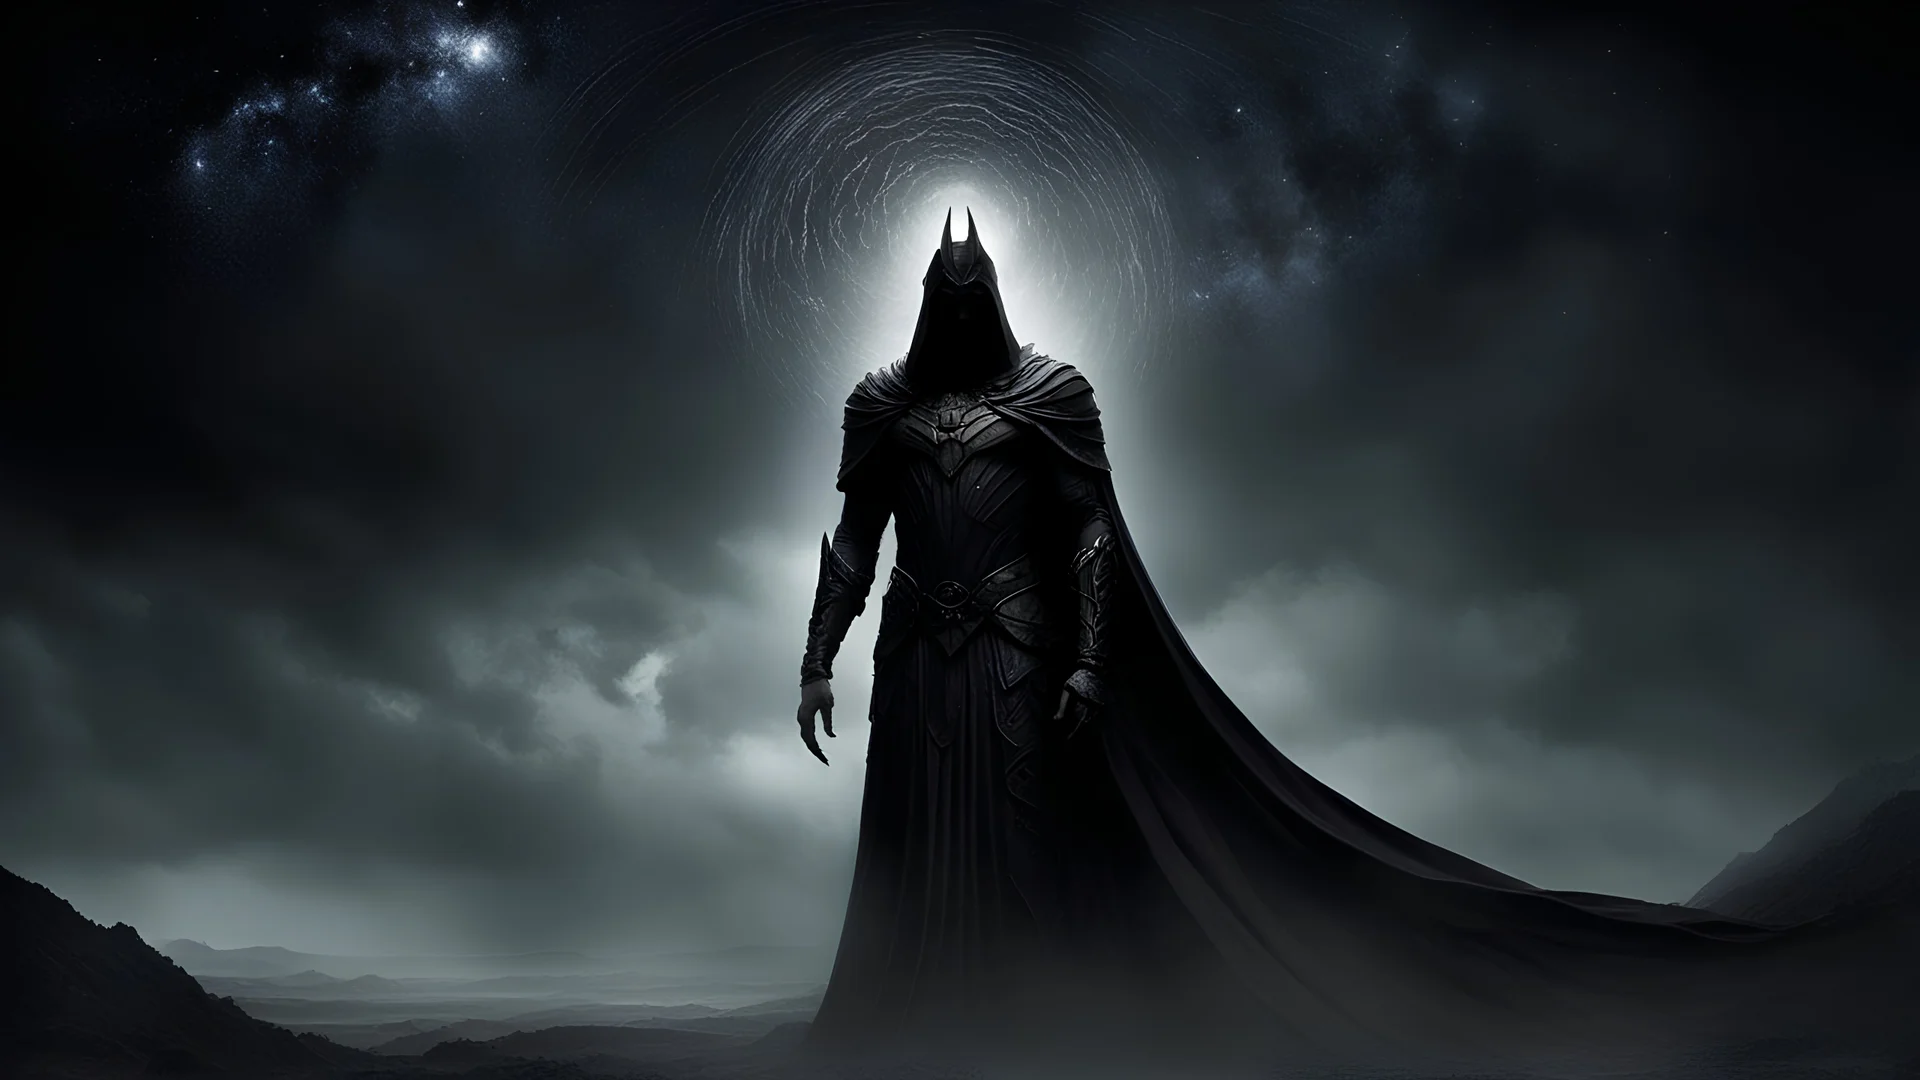 The Dark Prince. Legend whispered of his ascent, a tale woven with threads of darkness and despair that entwined the very fabric of reality. From the depths of obscurity, he rose, a specter of doom shrouded in the pall of night, his gaze piercing the veil between the mortal realm and the abyss beyond. Insatiable Hunger for power. Purple shine, dark lighting, gloomy, evil atmosphere.